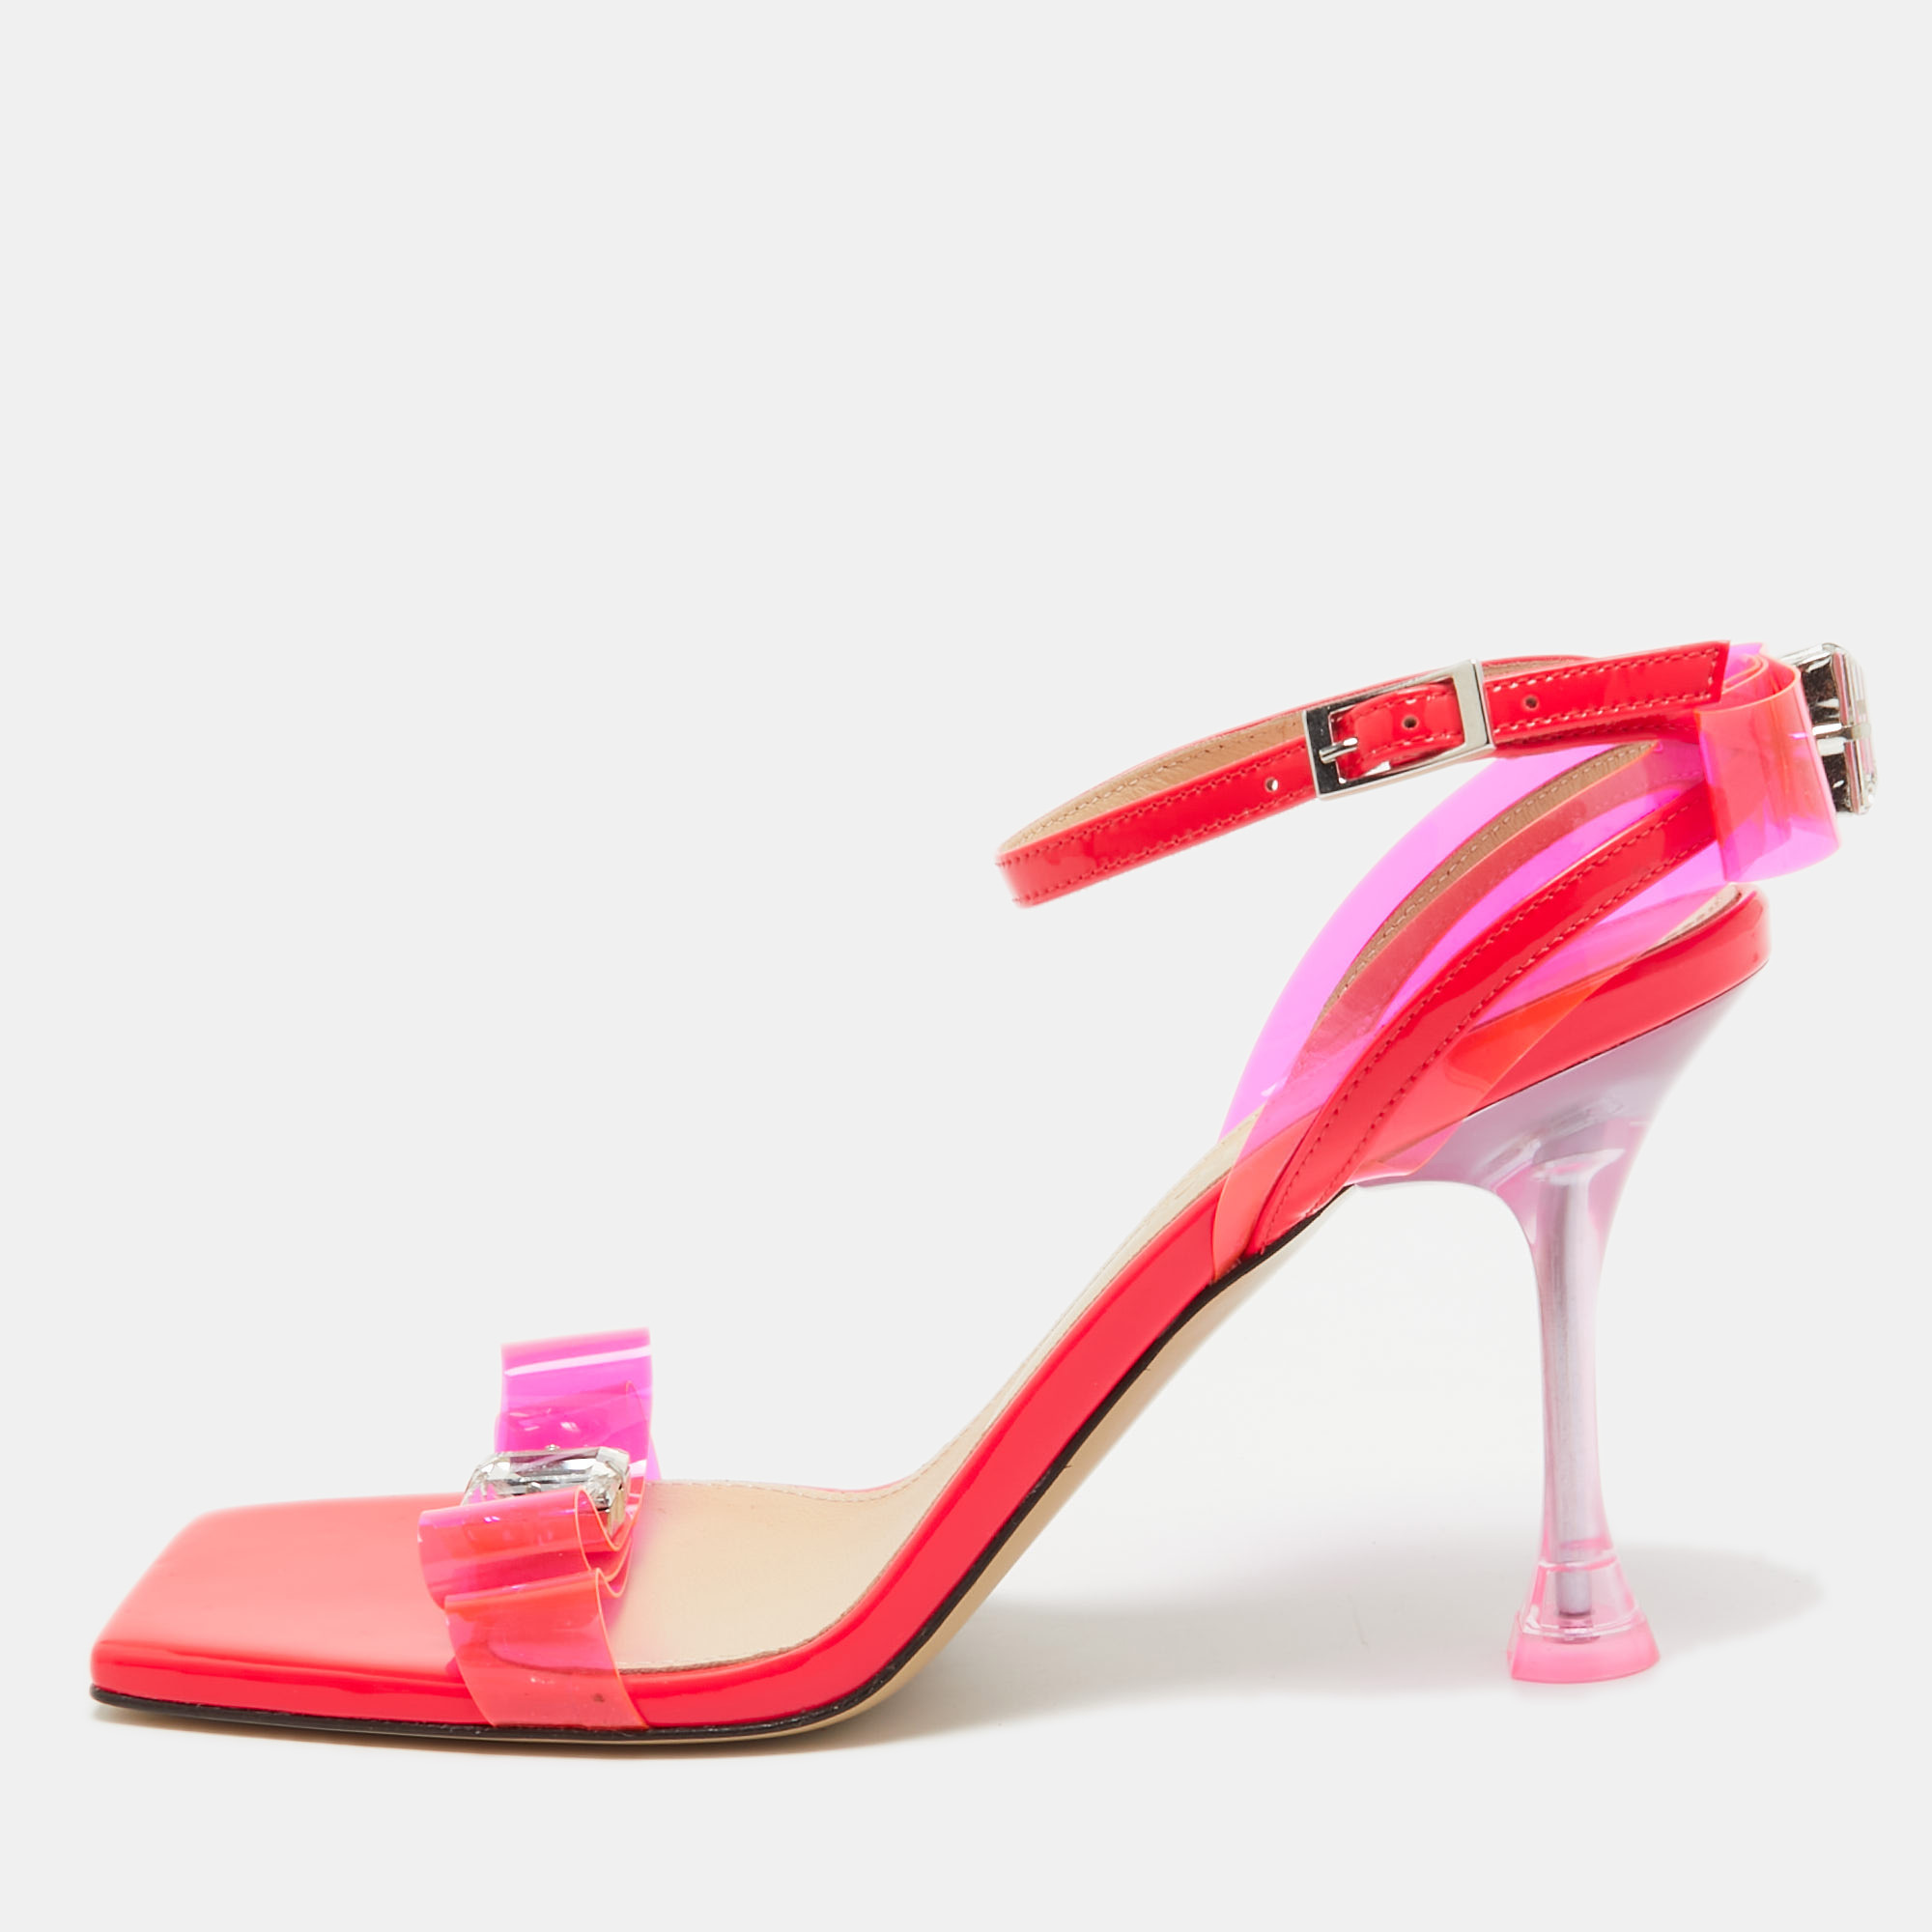 Mach & mach neon pink pvc and patent leather french bow sandals size 38